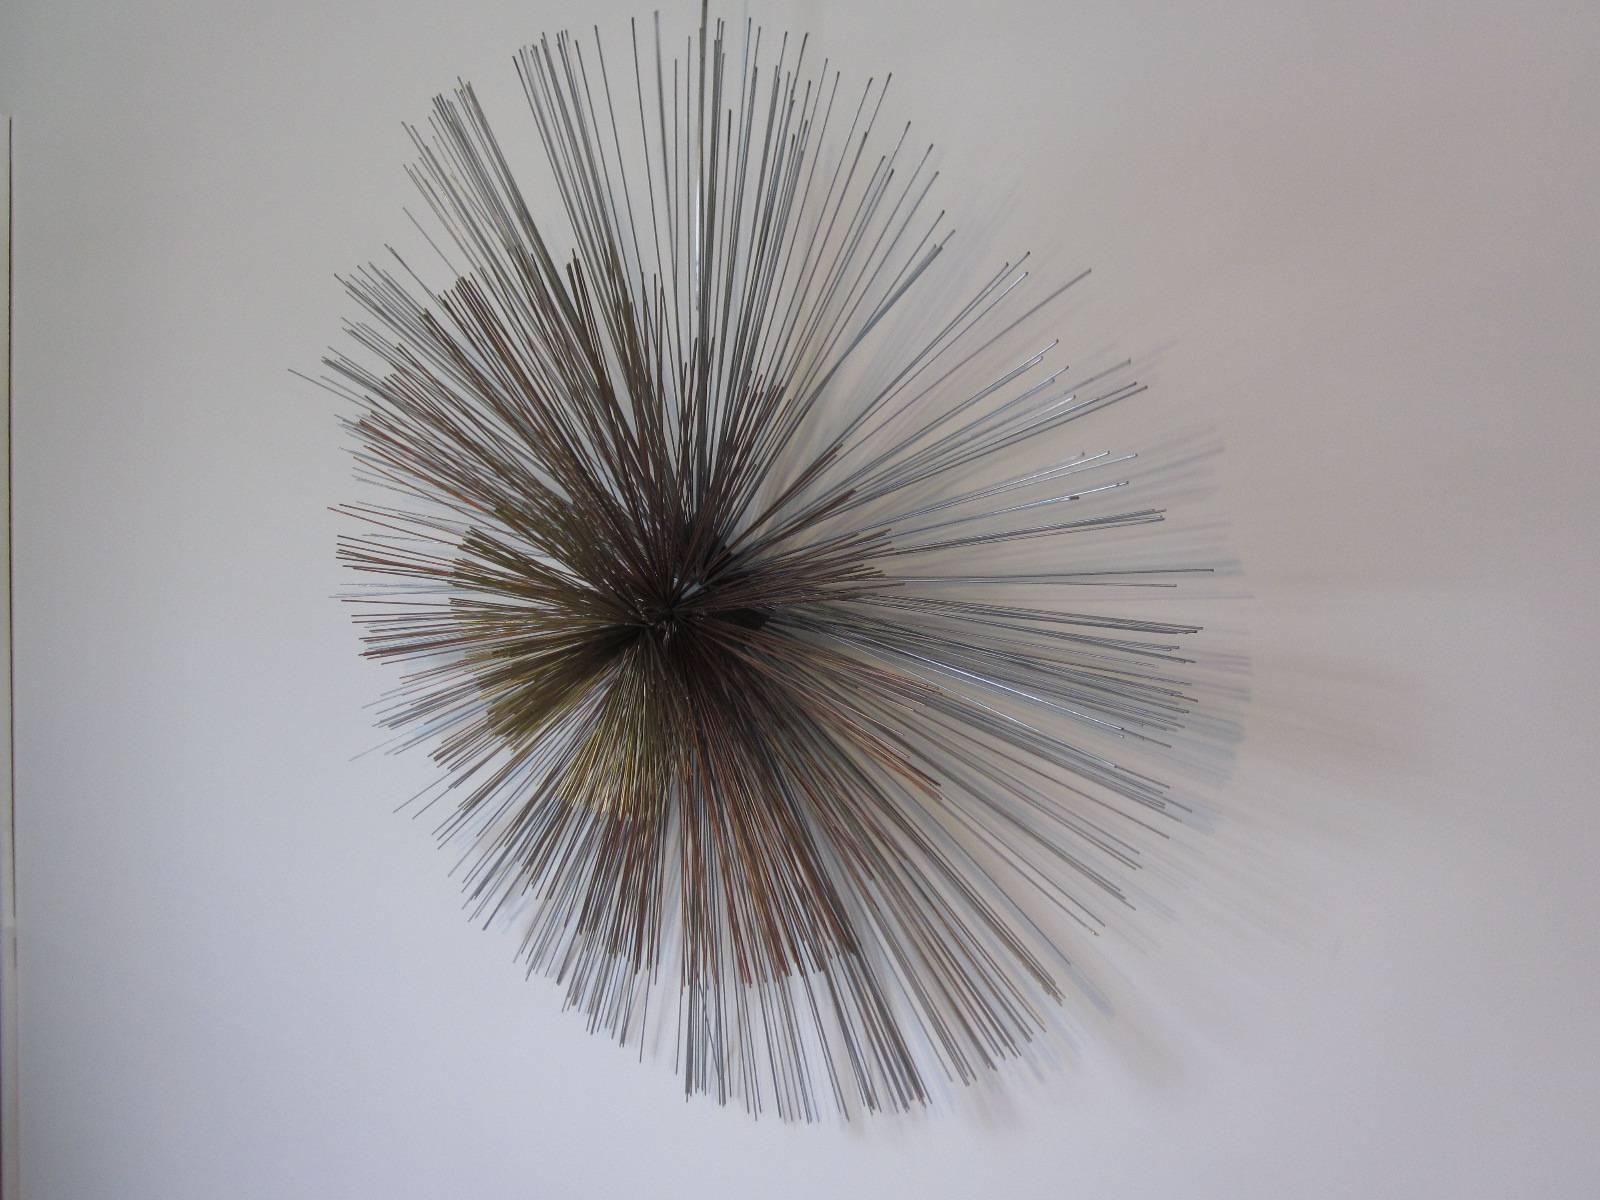 A starburst wall sculpture using three different types of heavy duty metal wire, brass center, copper inner ring and a stainless steel outer ring all in which can be spun around. A wonderful textured piece of art with a steel mounting plate attached